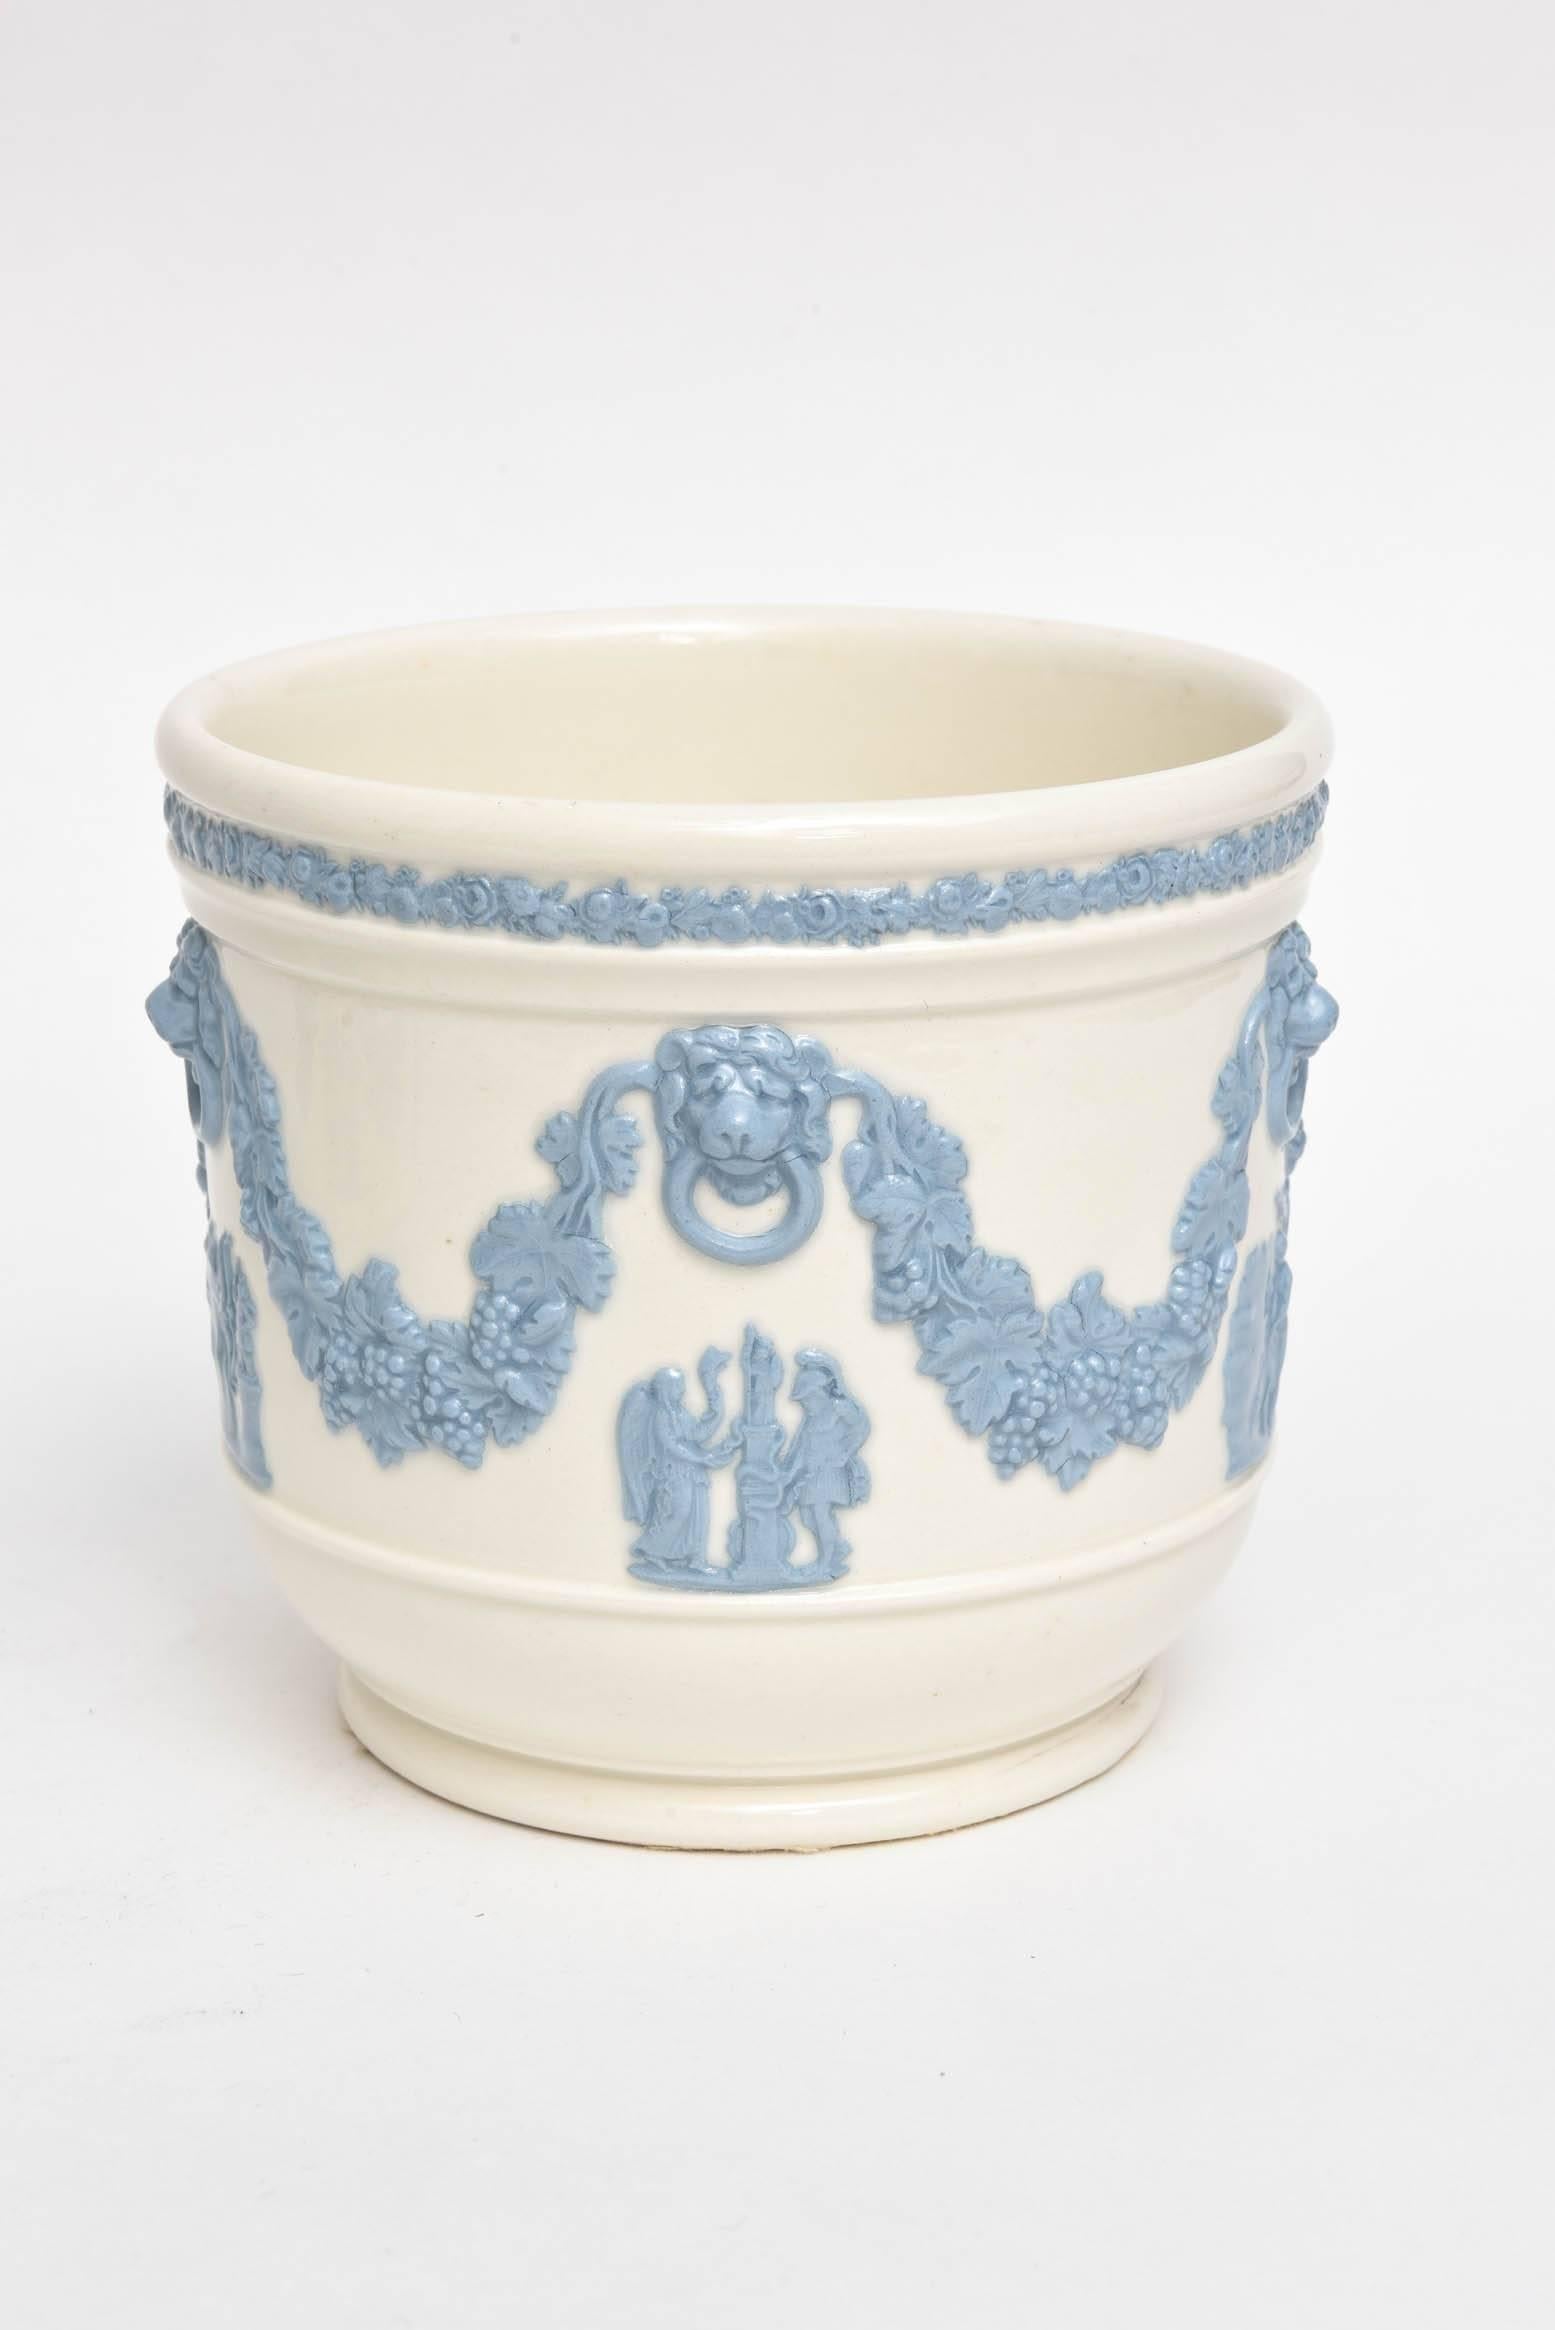 Neoclassical Pair of Wedgwood Blue White Cache Pots, Lion's Head Handles Classical Scenes